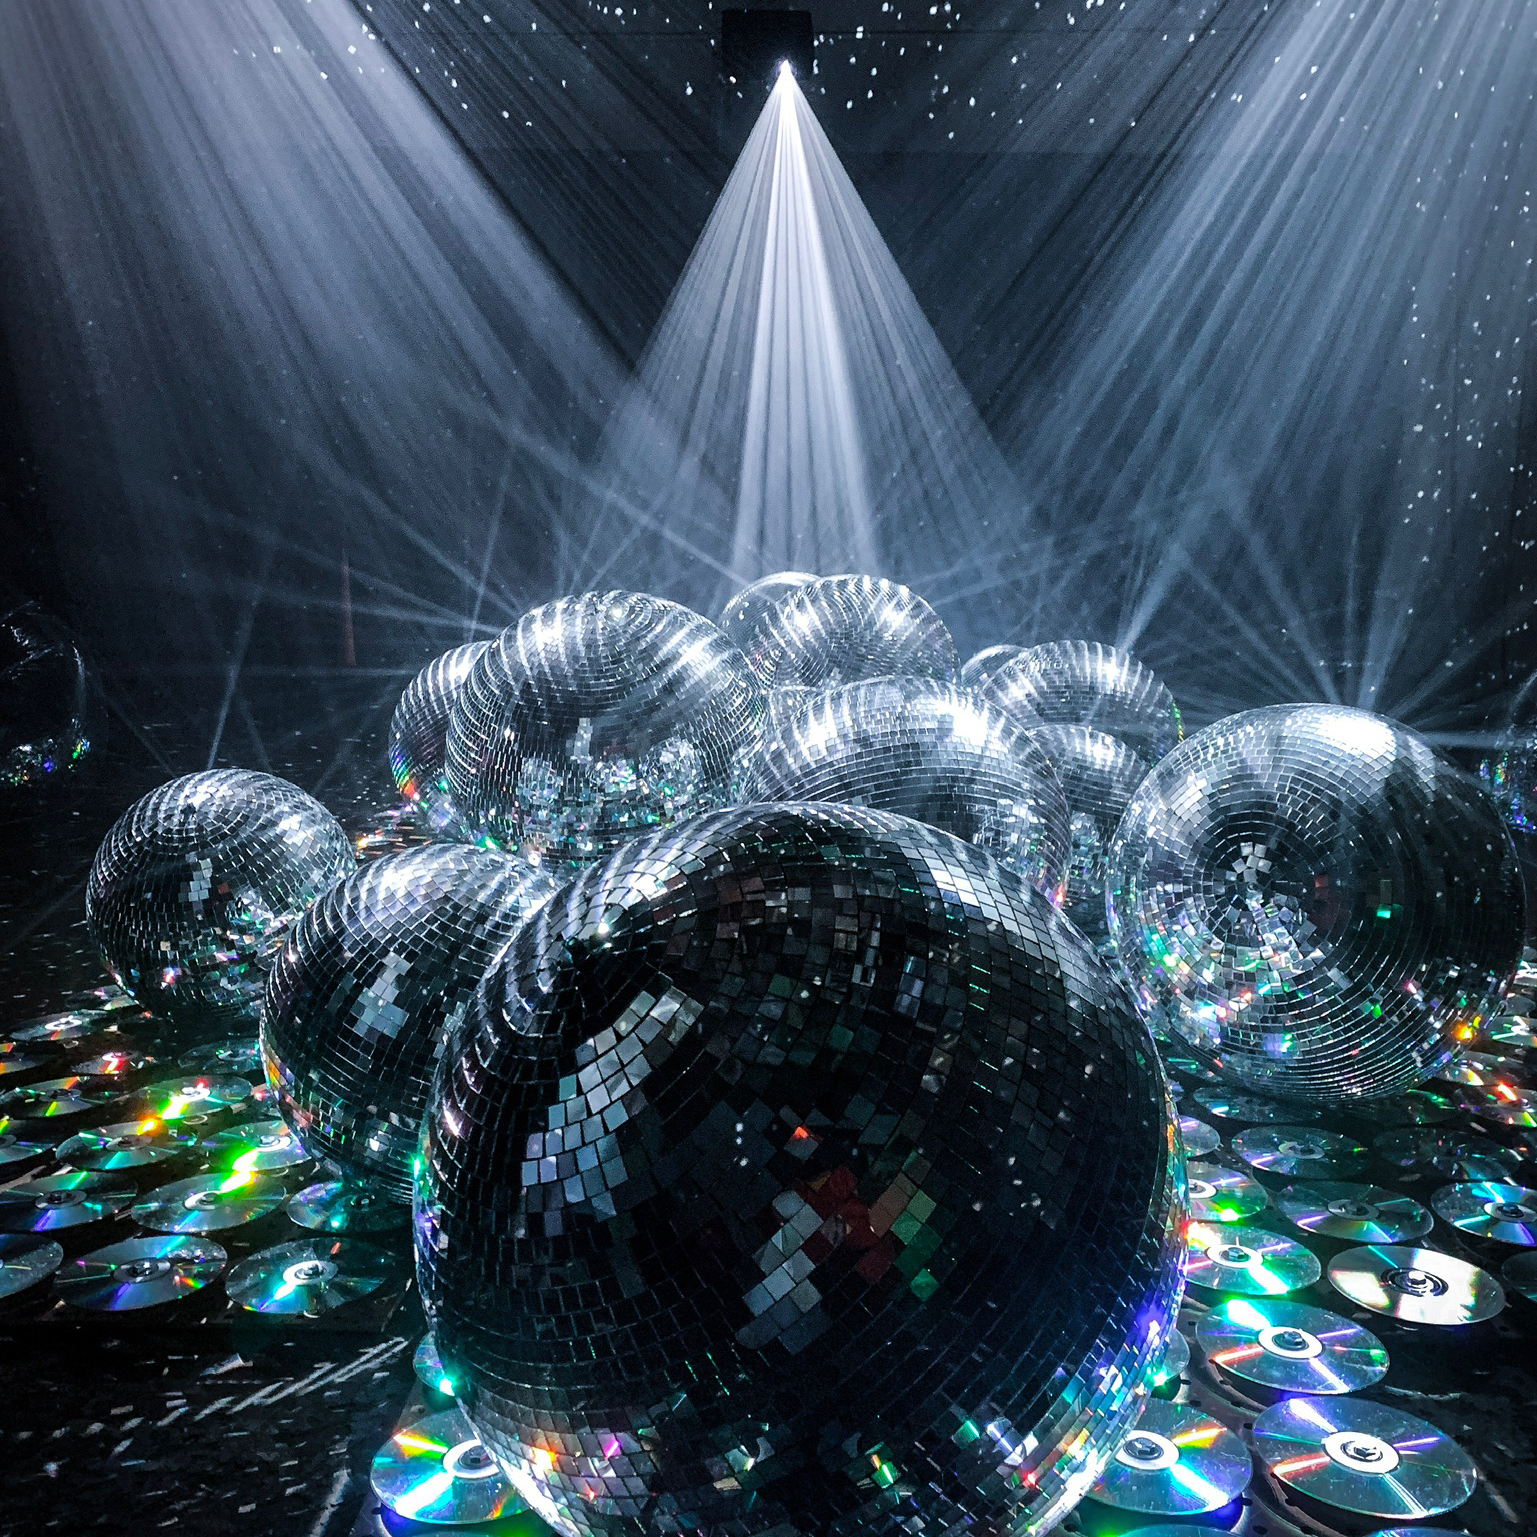 The photo shows a large room filled with CDs, mirror balls, and projection mapping creating a room filled with shimmering mirror reflections that look like the night sky.